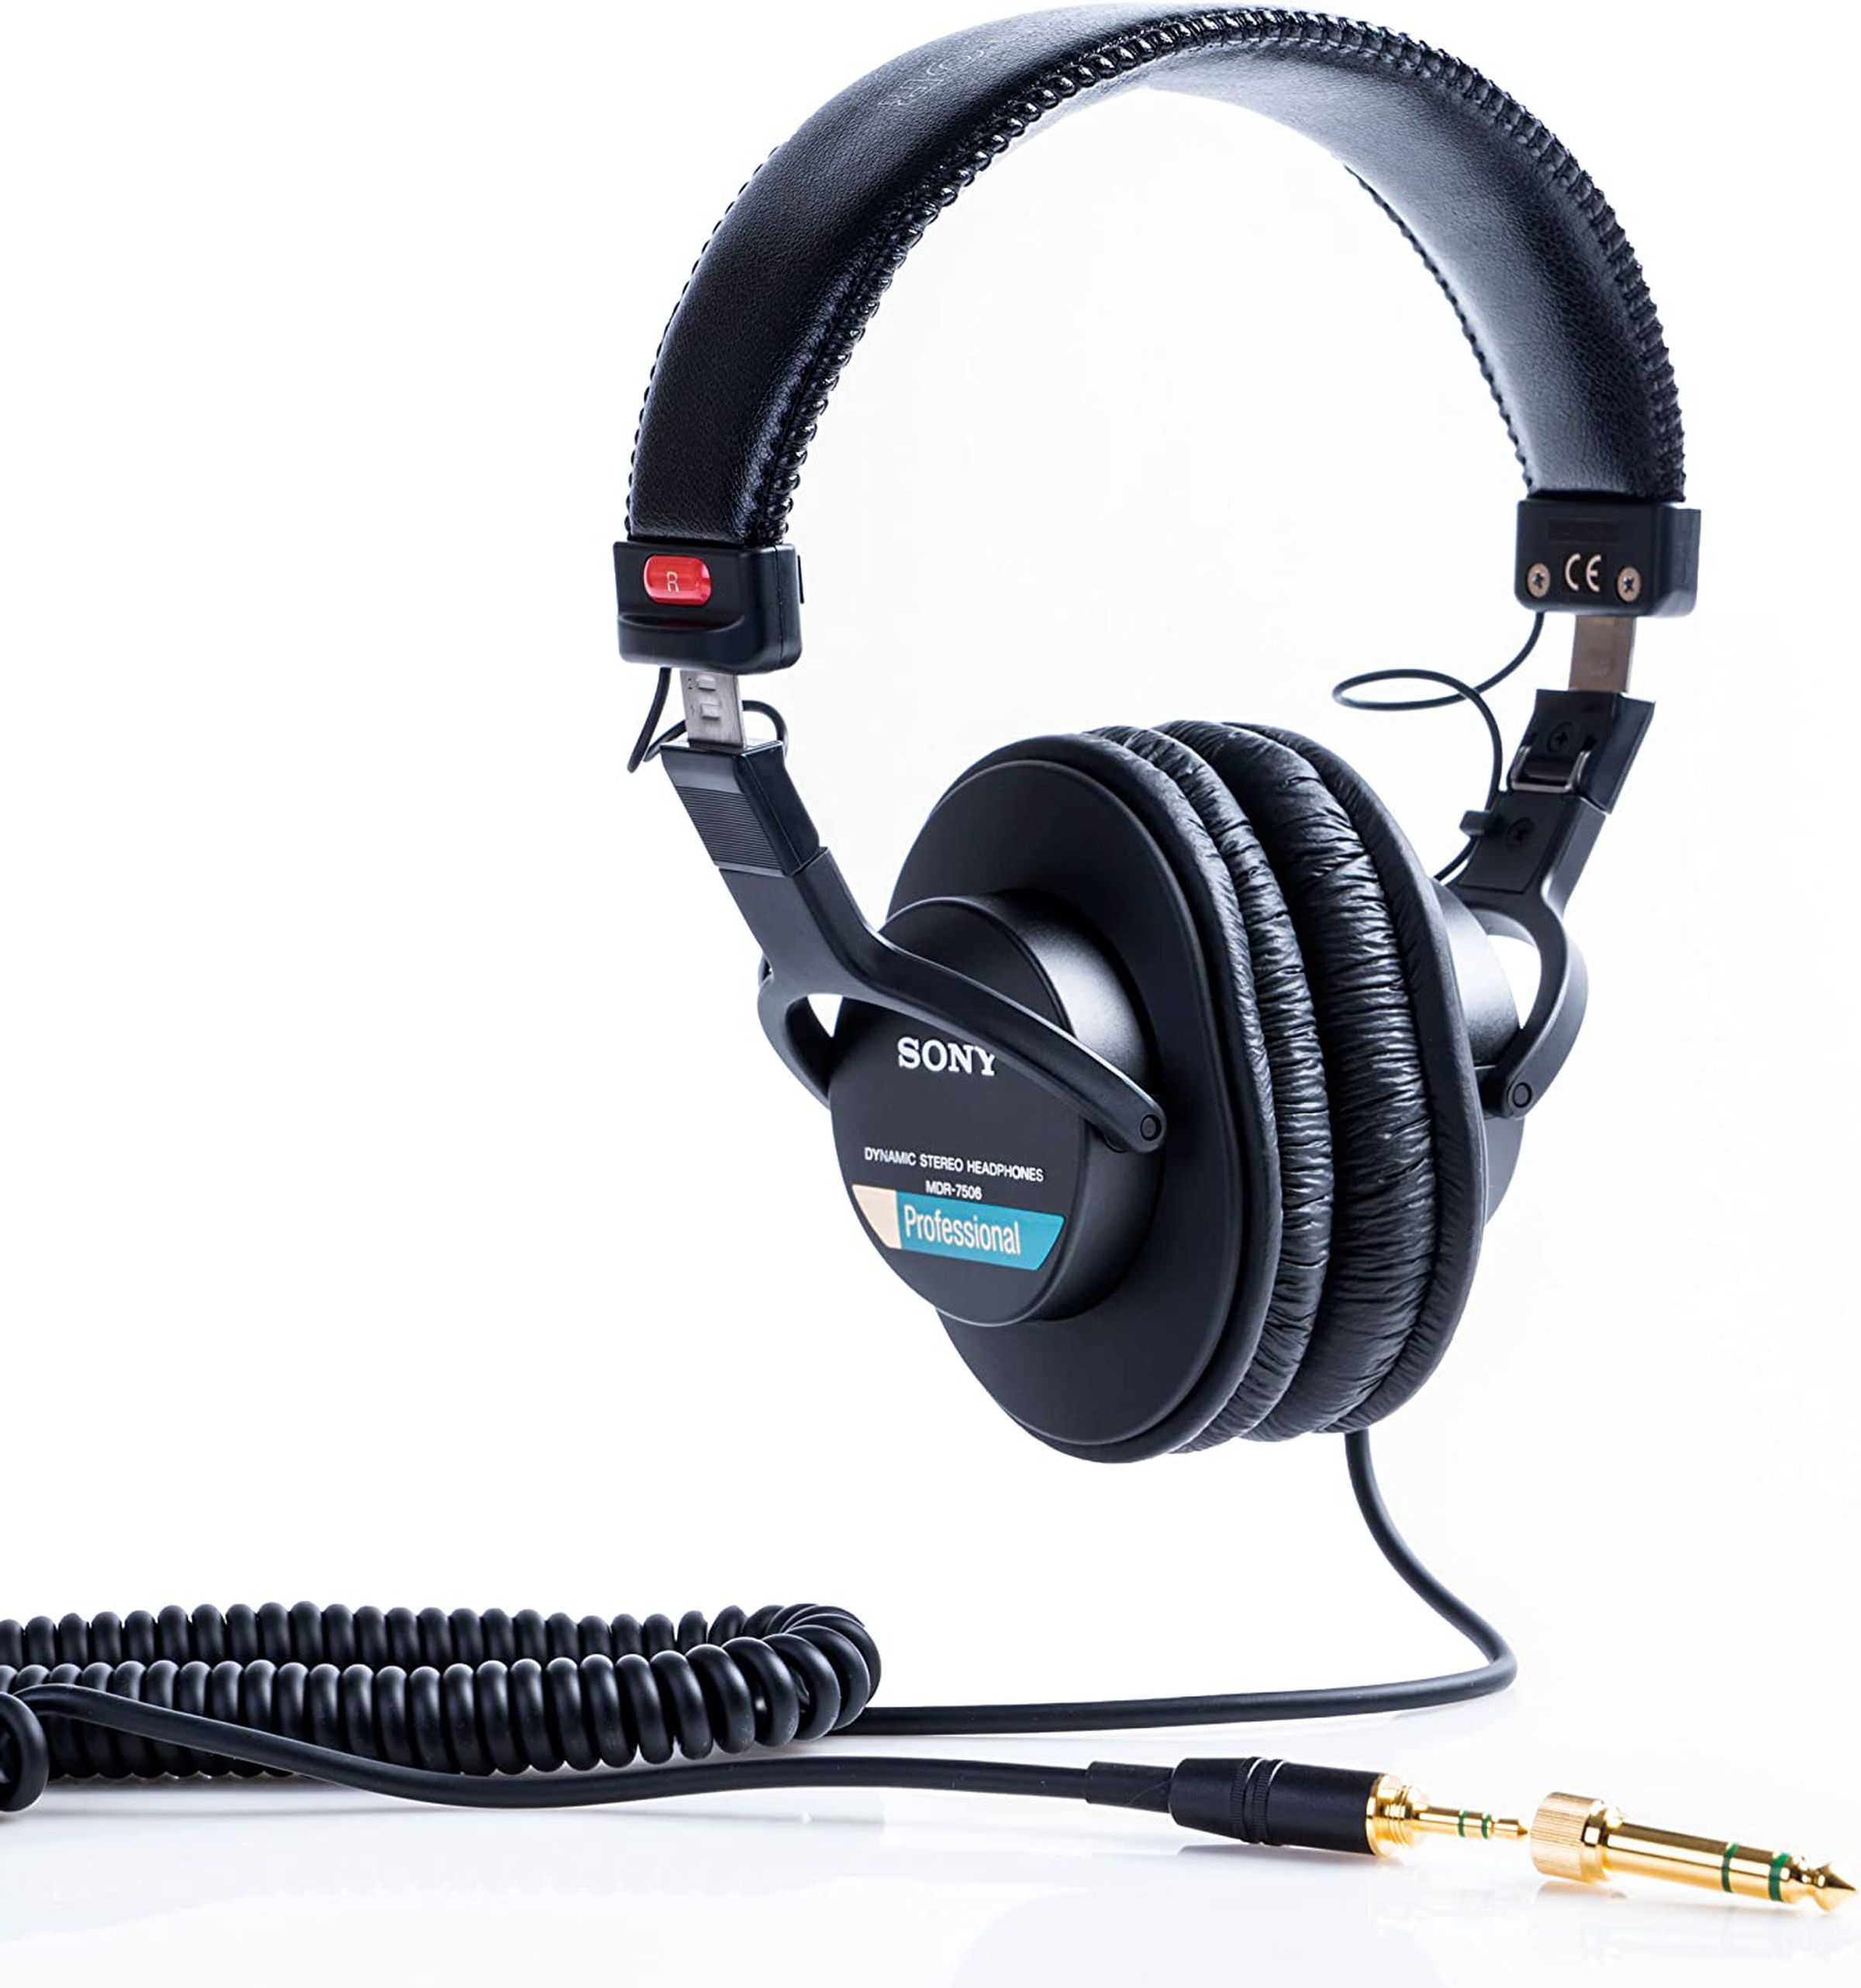 The Sony MDR-7506s are an industry standard, excellent value, and I hate them.